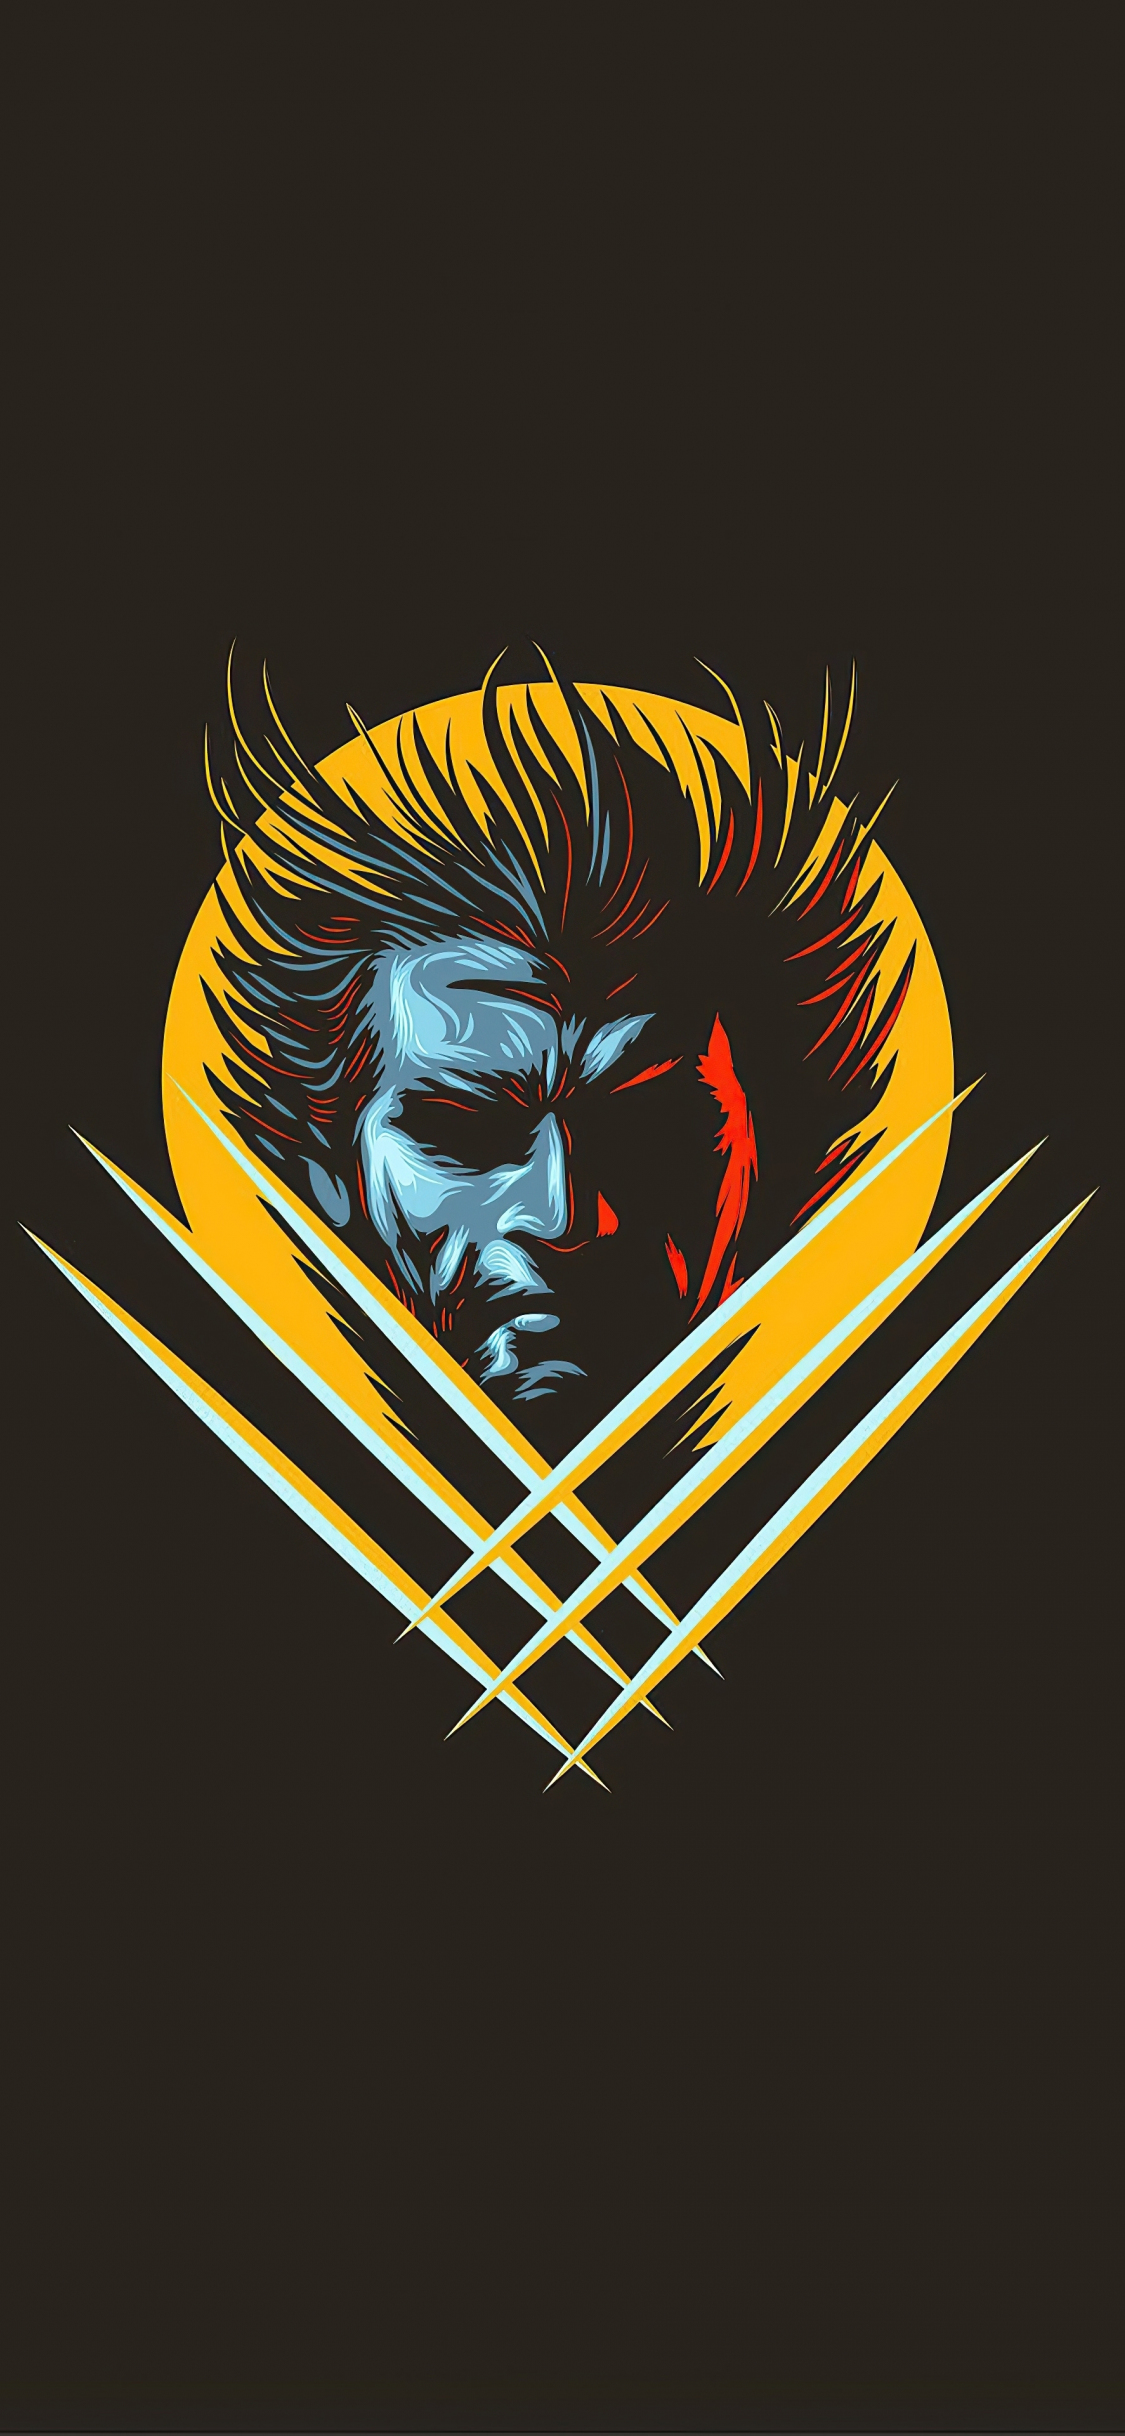 Download 1125x2436 Wallpaper Wolverine Claws X Men Iphone X 1125x2436 Hd Image Background 25971